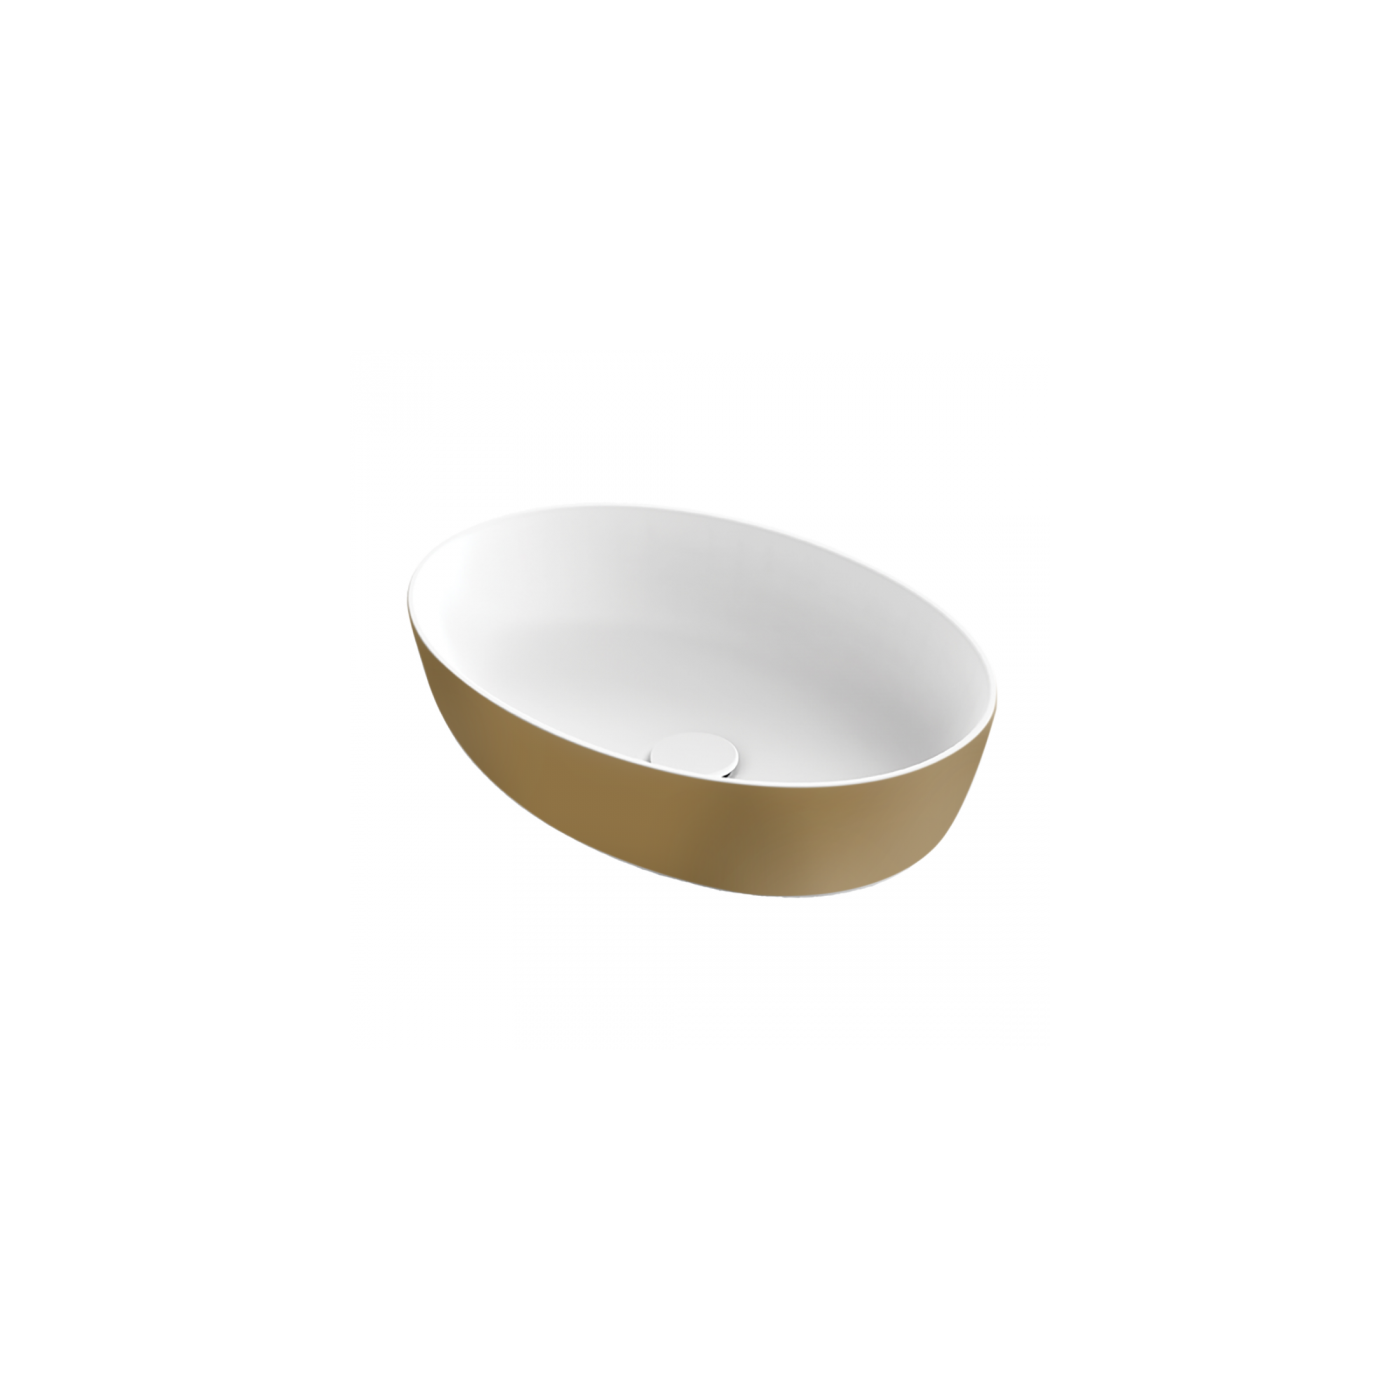 Xenz Neo-E waskom ovaal solid surface wit goud